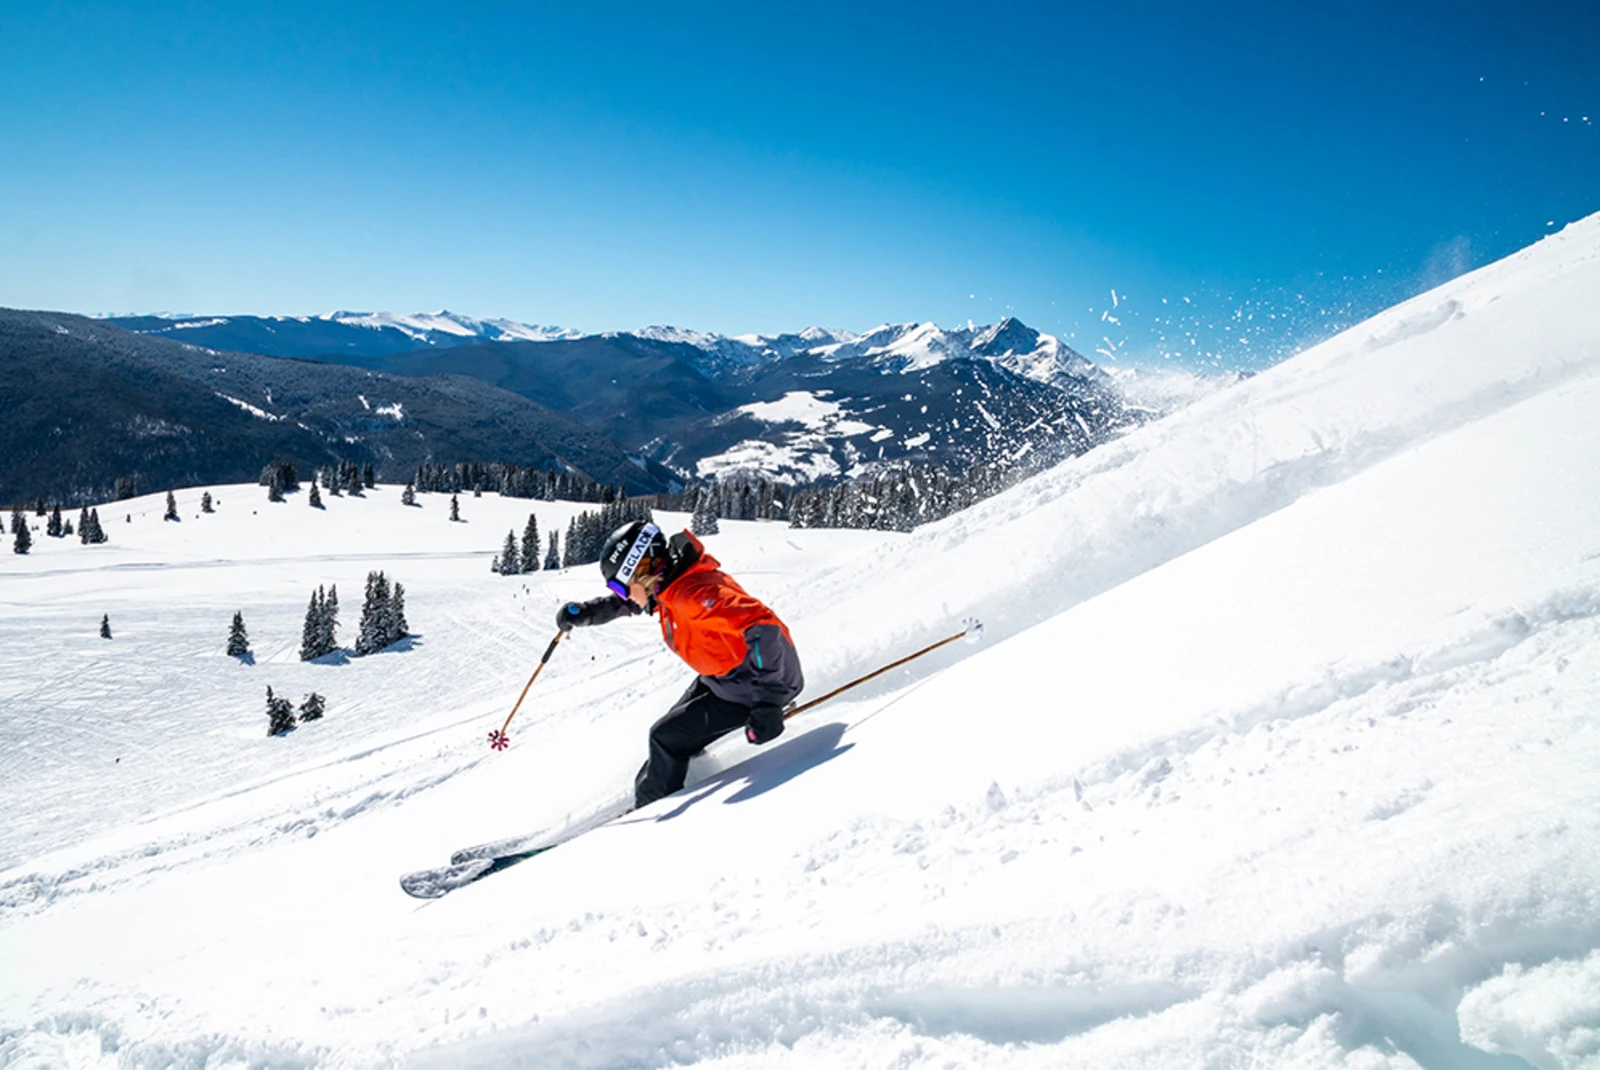 A person in red jacket, black pants and helmet skiing down a snowy mountain under a blue sky.